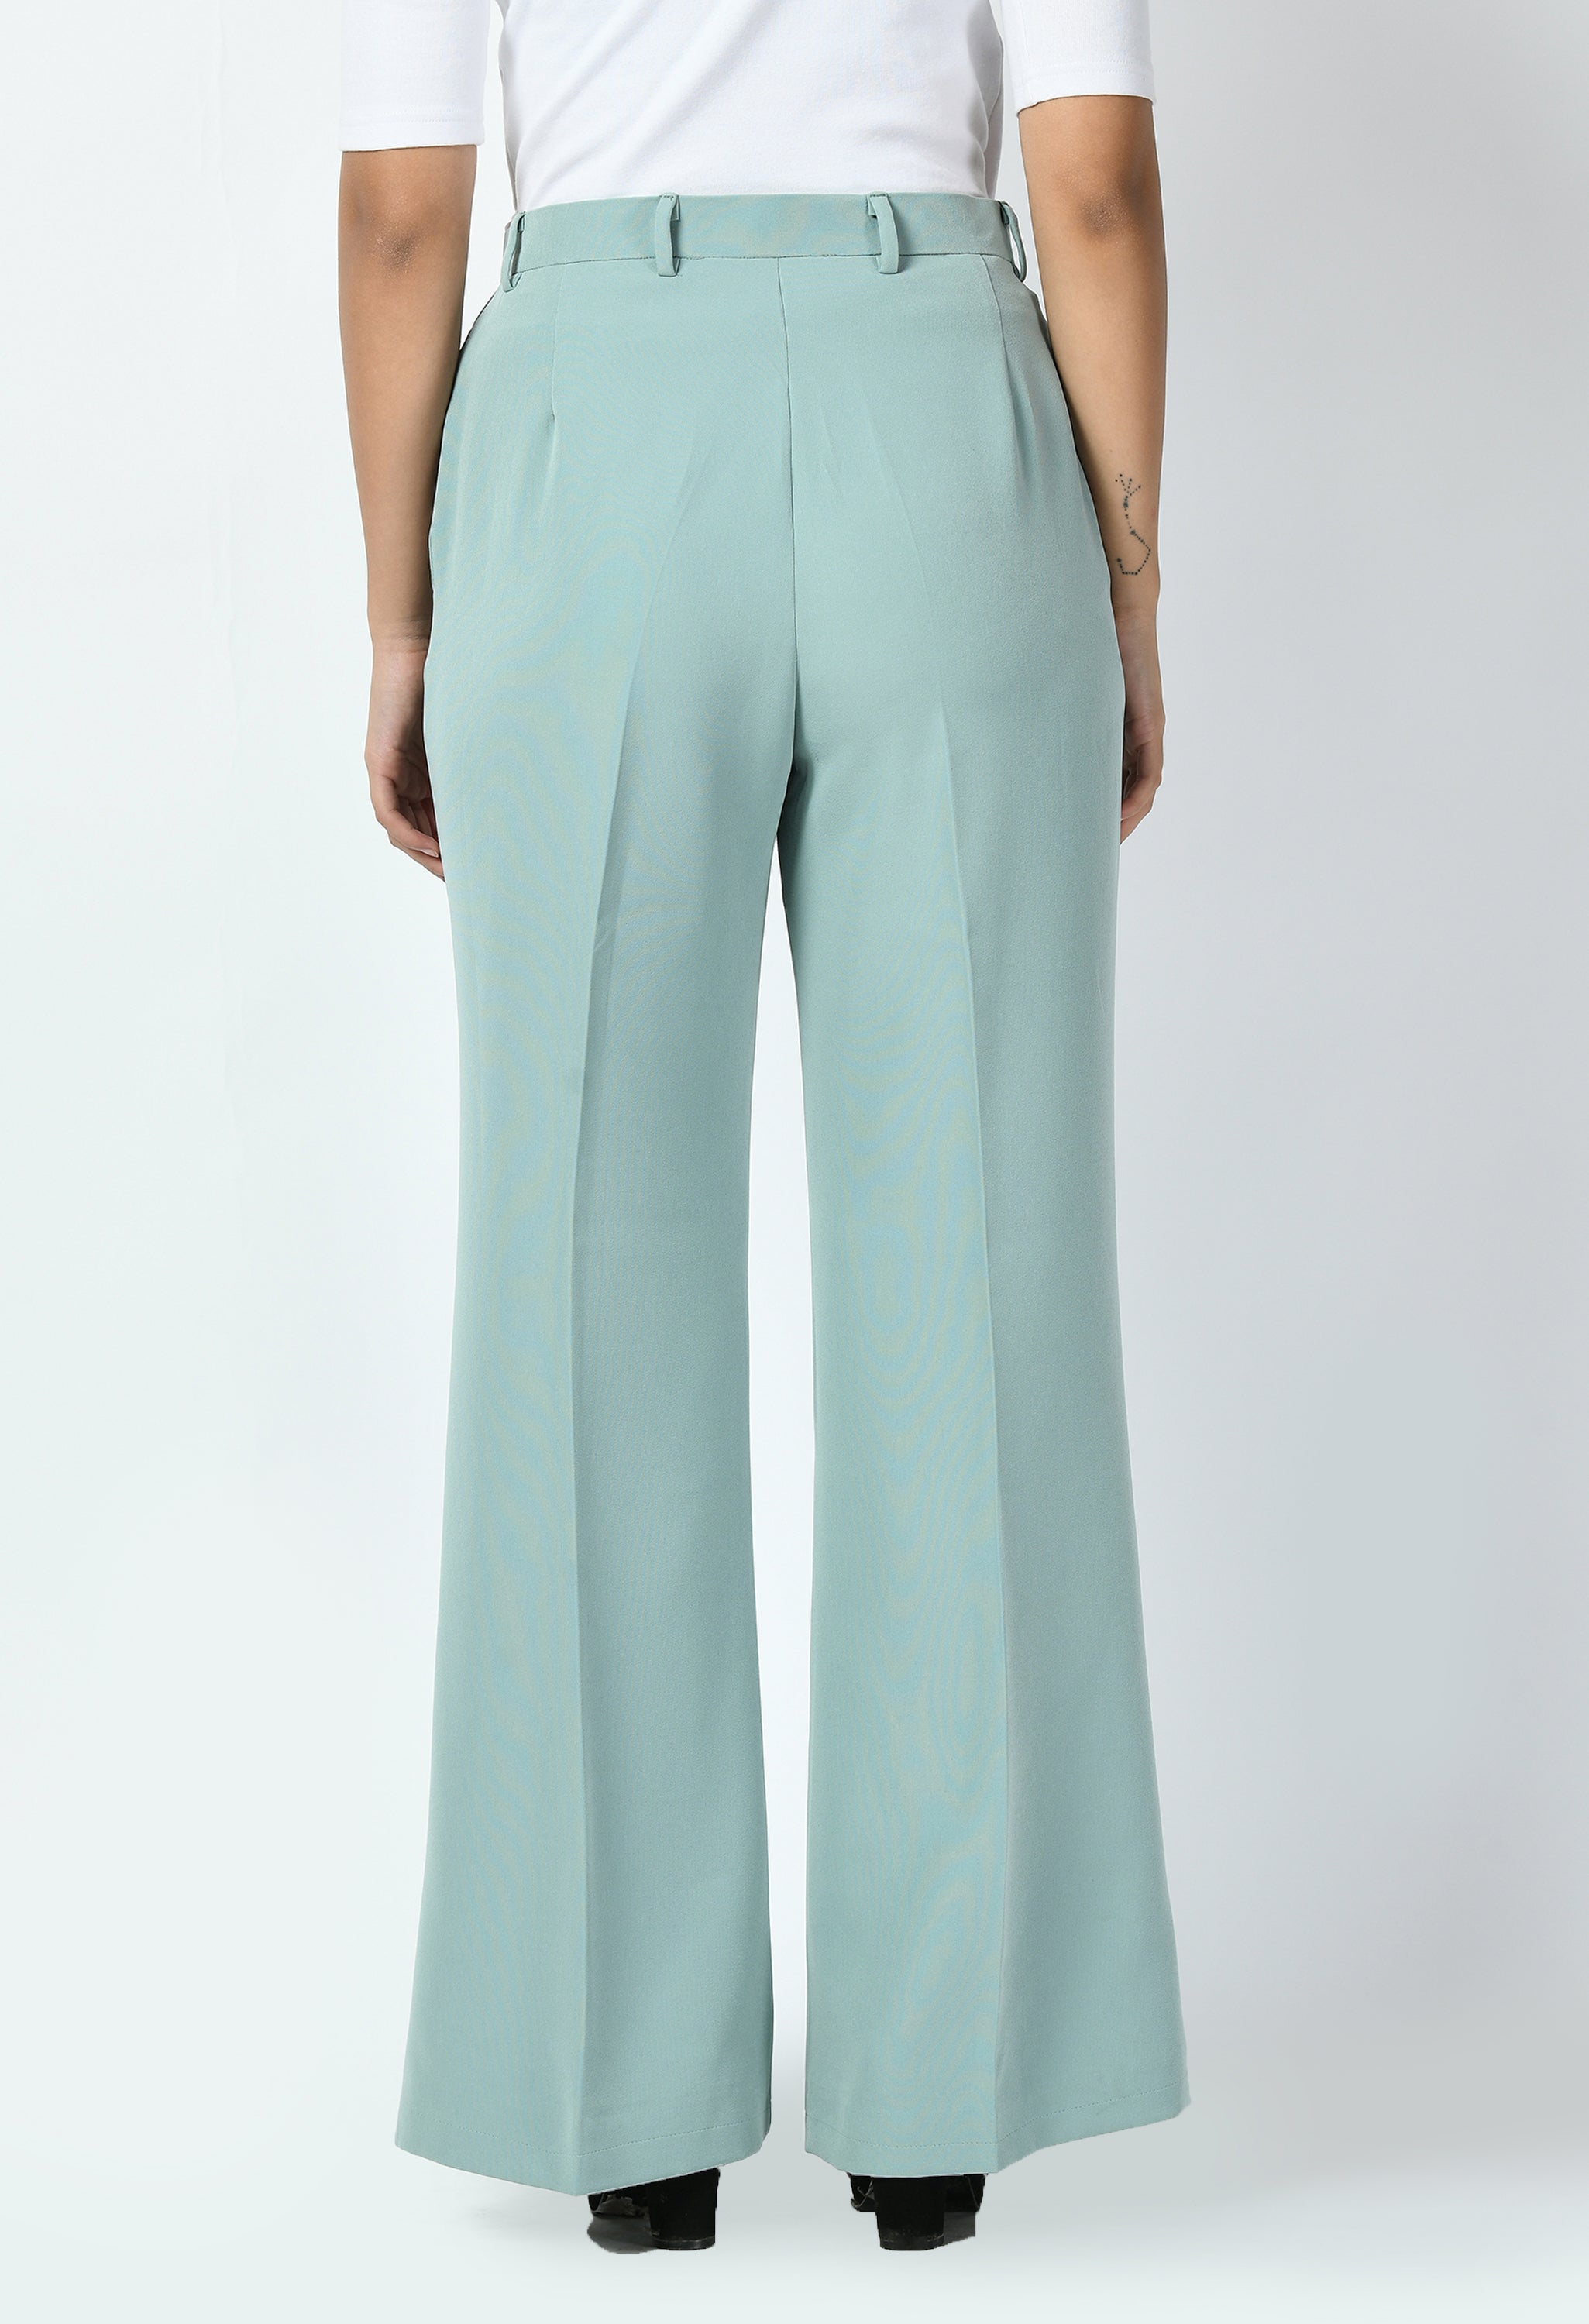 Exude Vitality Formal Blazer with Bootcut Trousers (Cyan Blue)